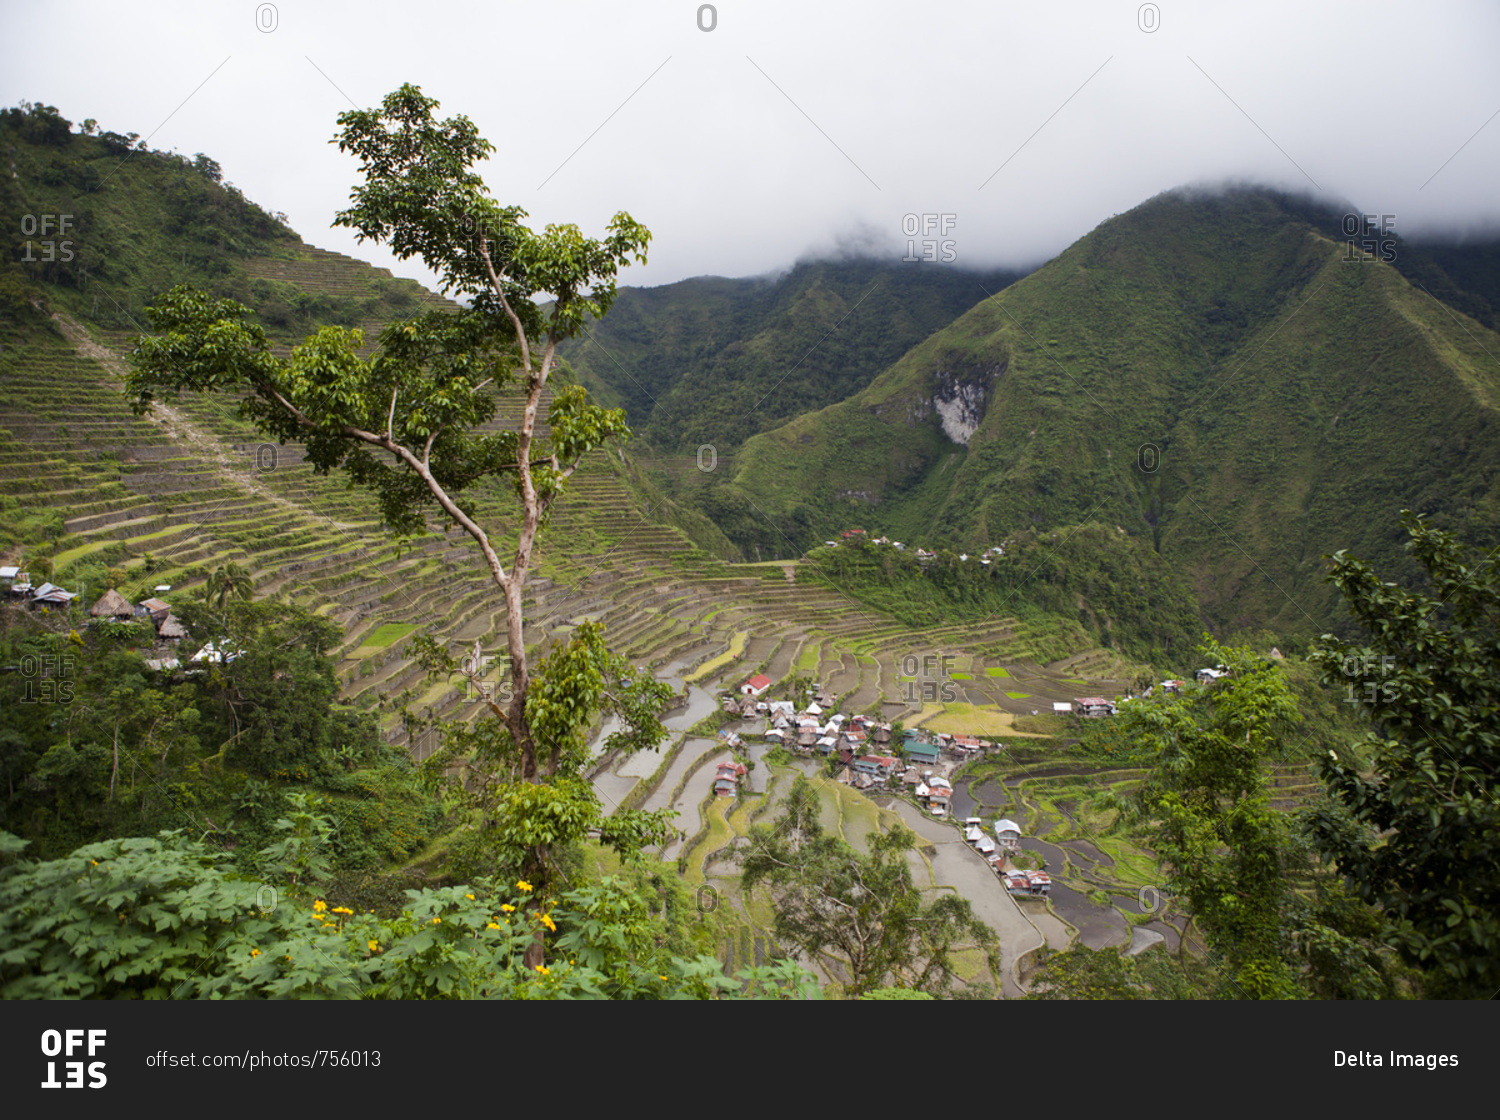 Rice fields of Batad Province Ifugao, Philippines; One of the oldest ricefields in the worldPeople of seasoned warriors and wood carvers, formerly head cutters, the Ifugaos perpetuate today as best they can their traditions and beliefs. Because defores